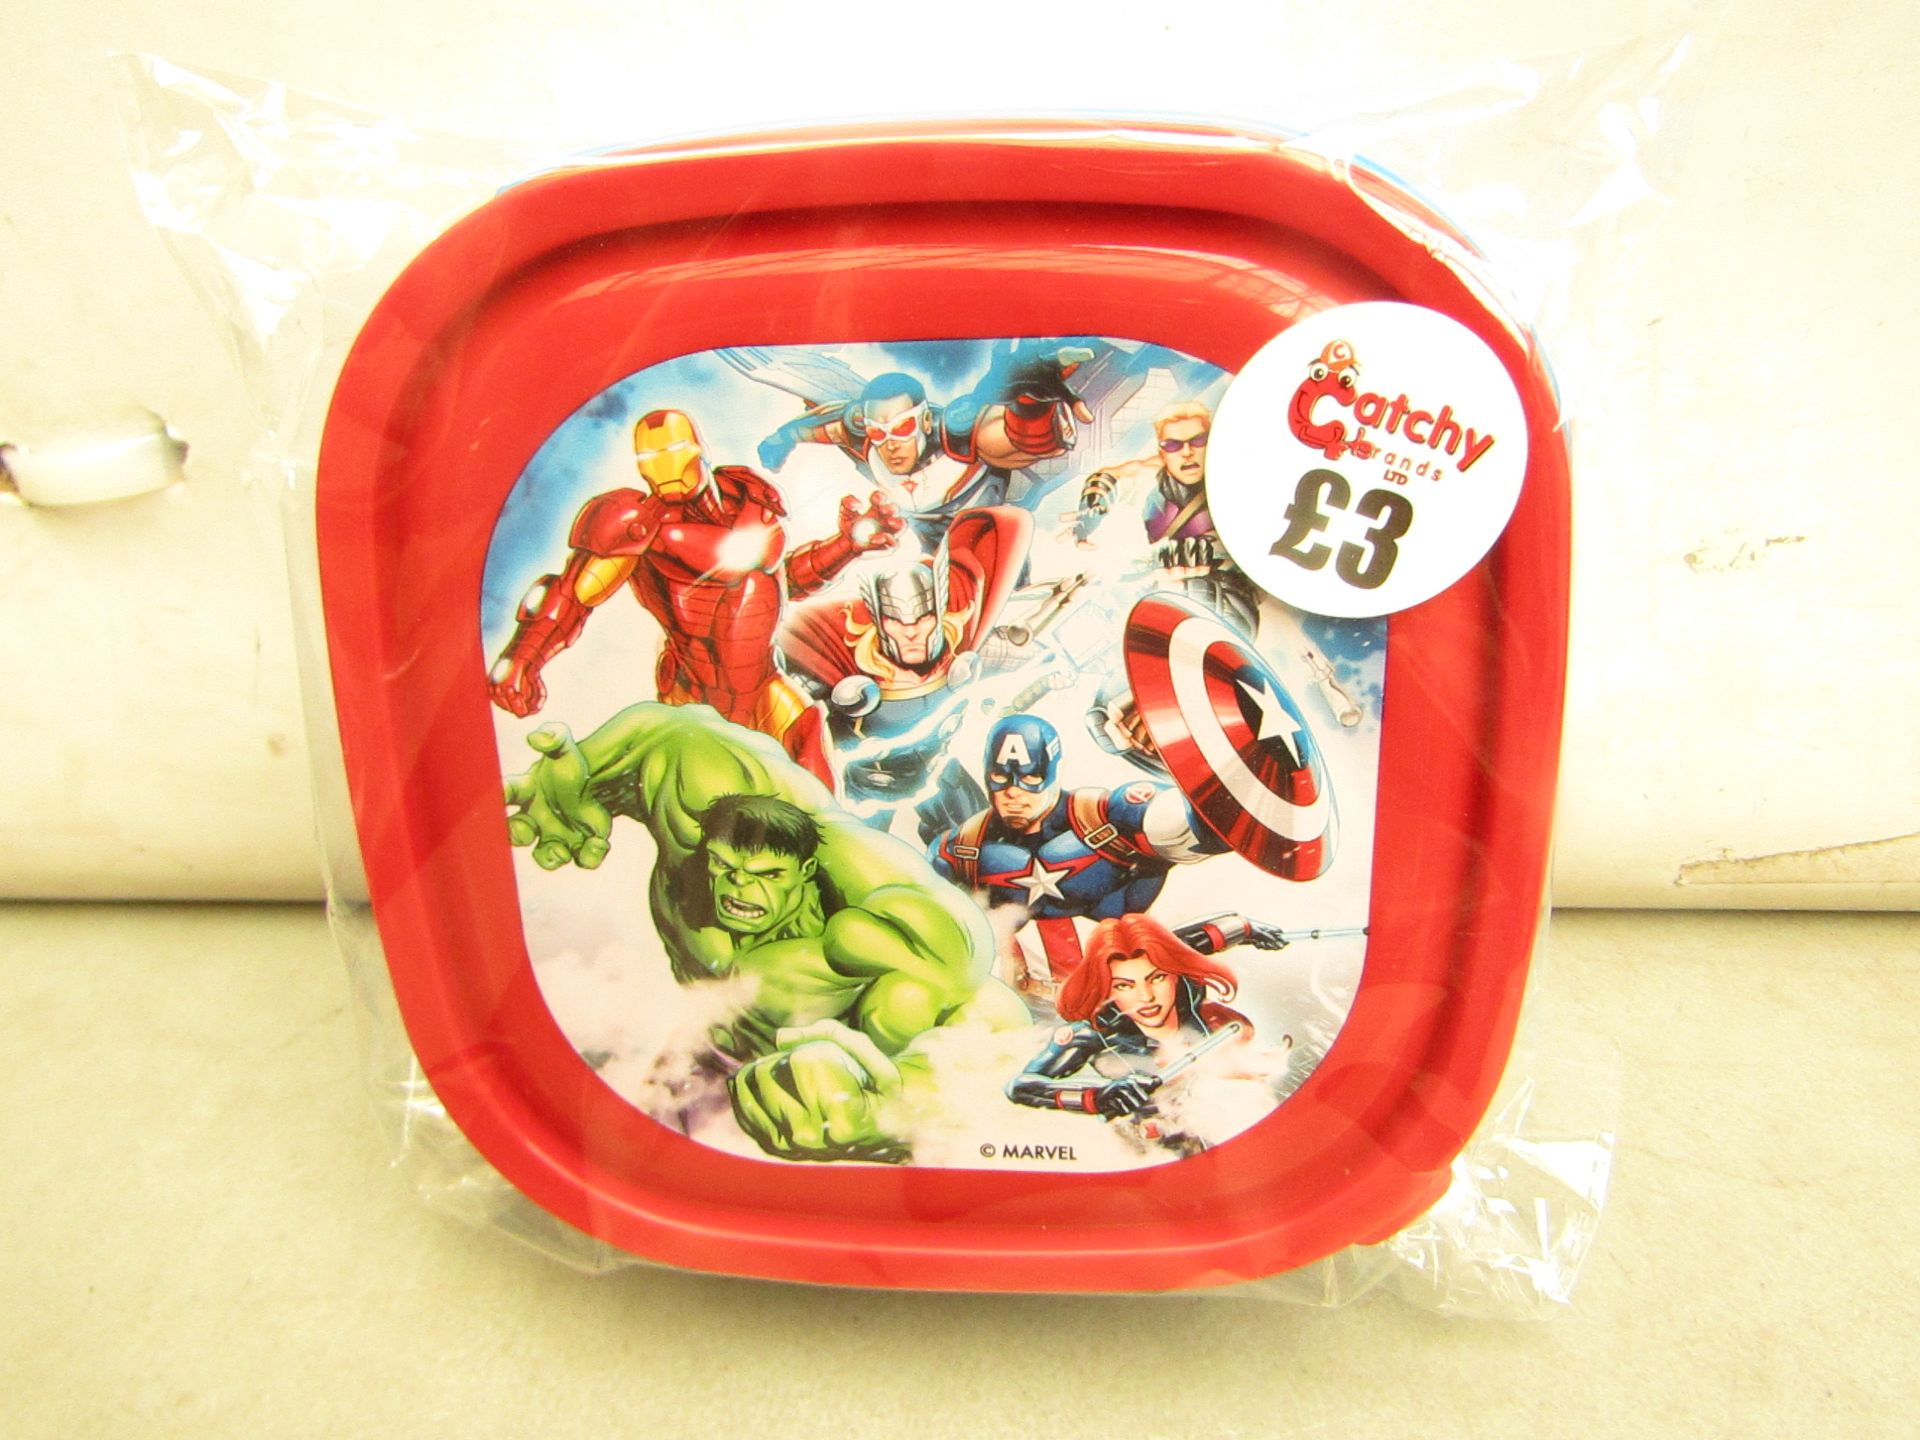 Box of 24 Avengers Plastic Snack boxes. New & Packaged. RRP £3 each